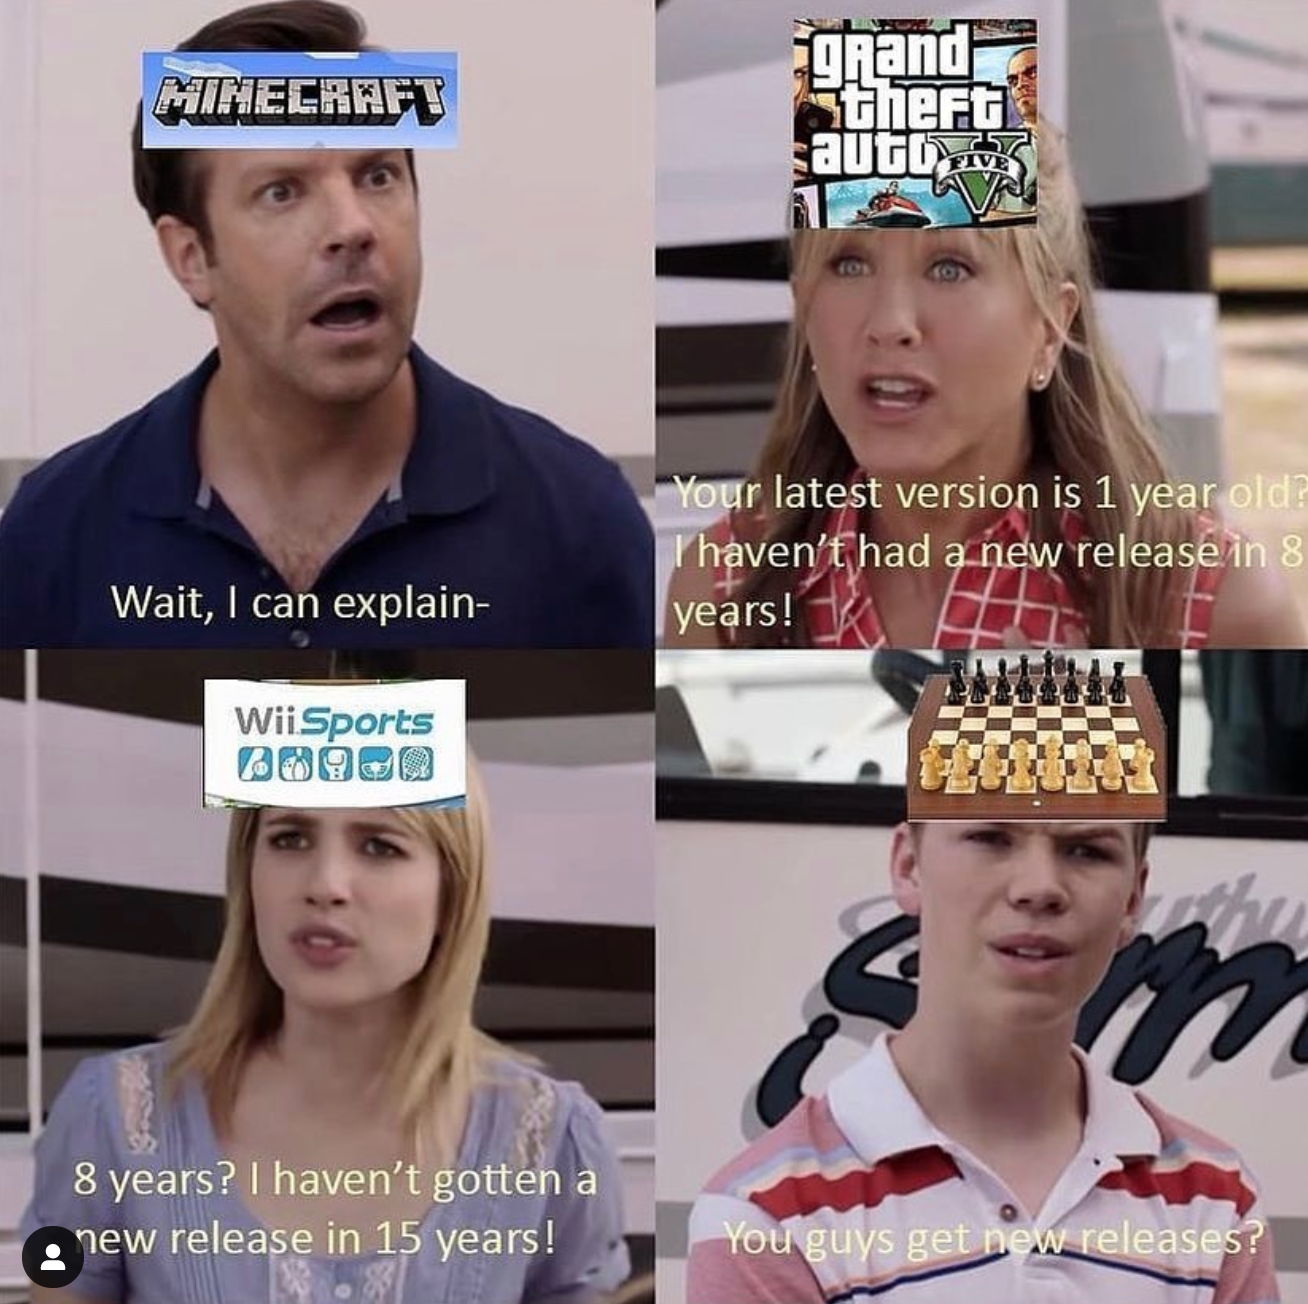 funny gaming memes  - you guys are getting paid meme template blank - Minecraft grand theft auto, 1. Your latest version is 1 year old haven't had a new release in 8 years! Wait, I can explain Wii Sports B0900 Soon 8 years? I haven't gotten a new release 